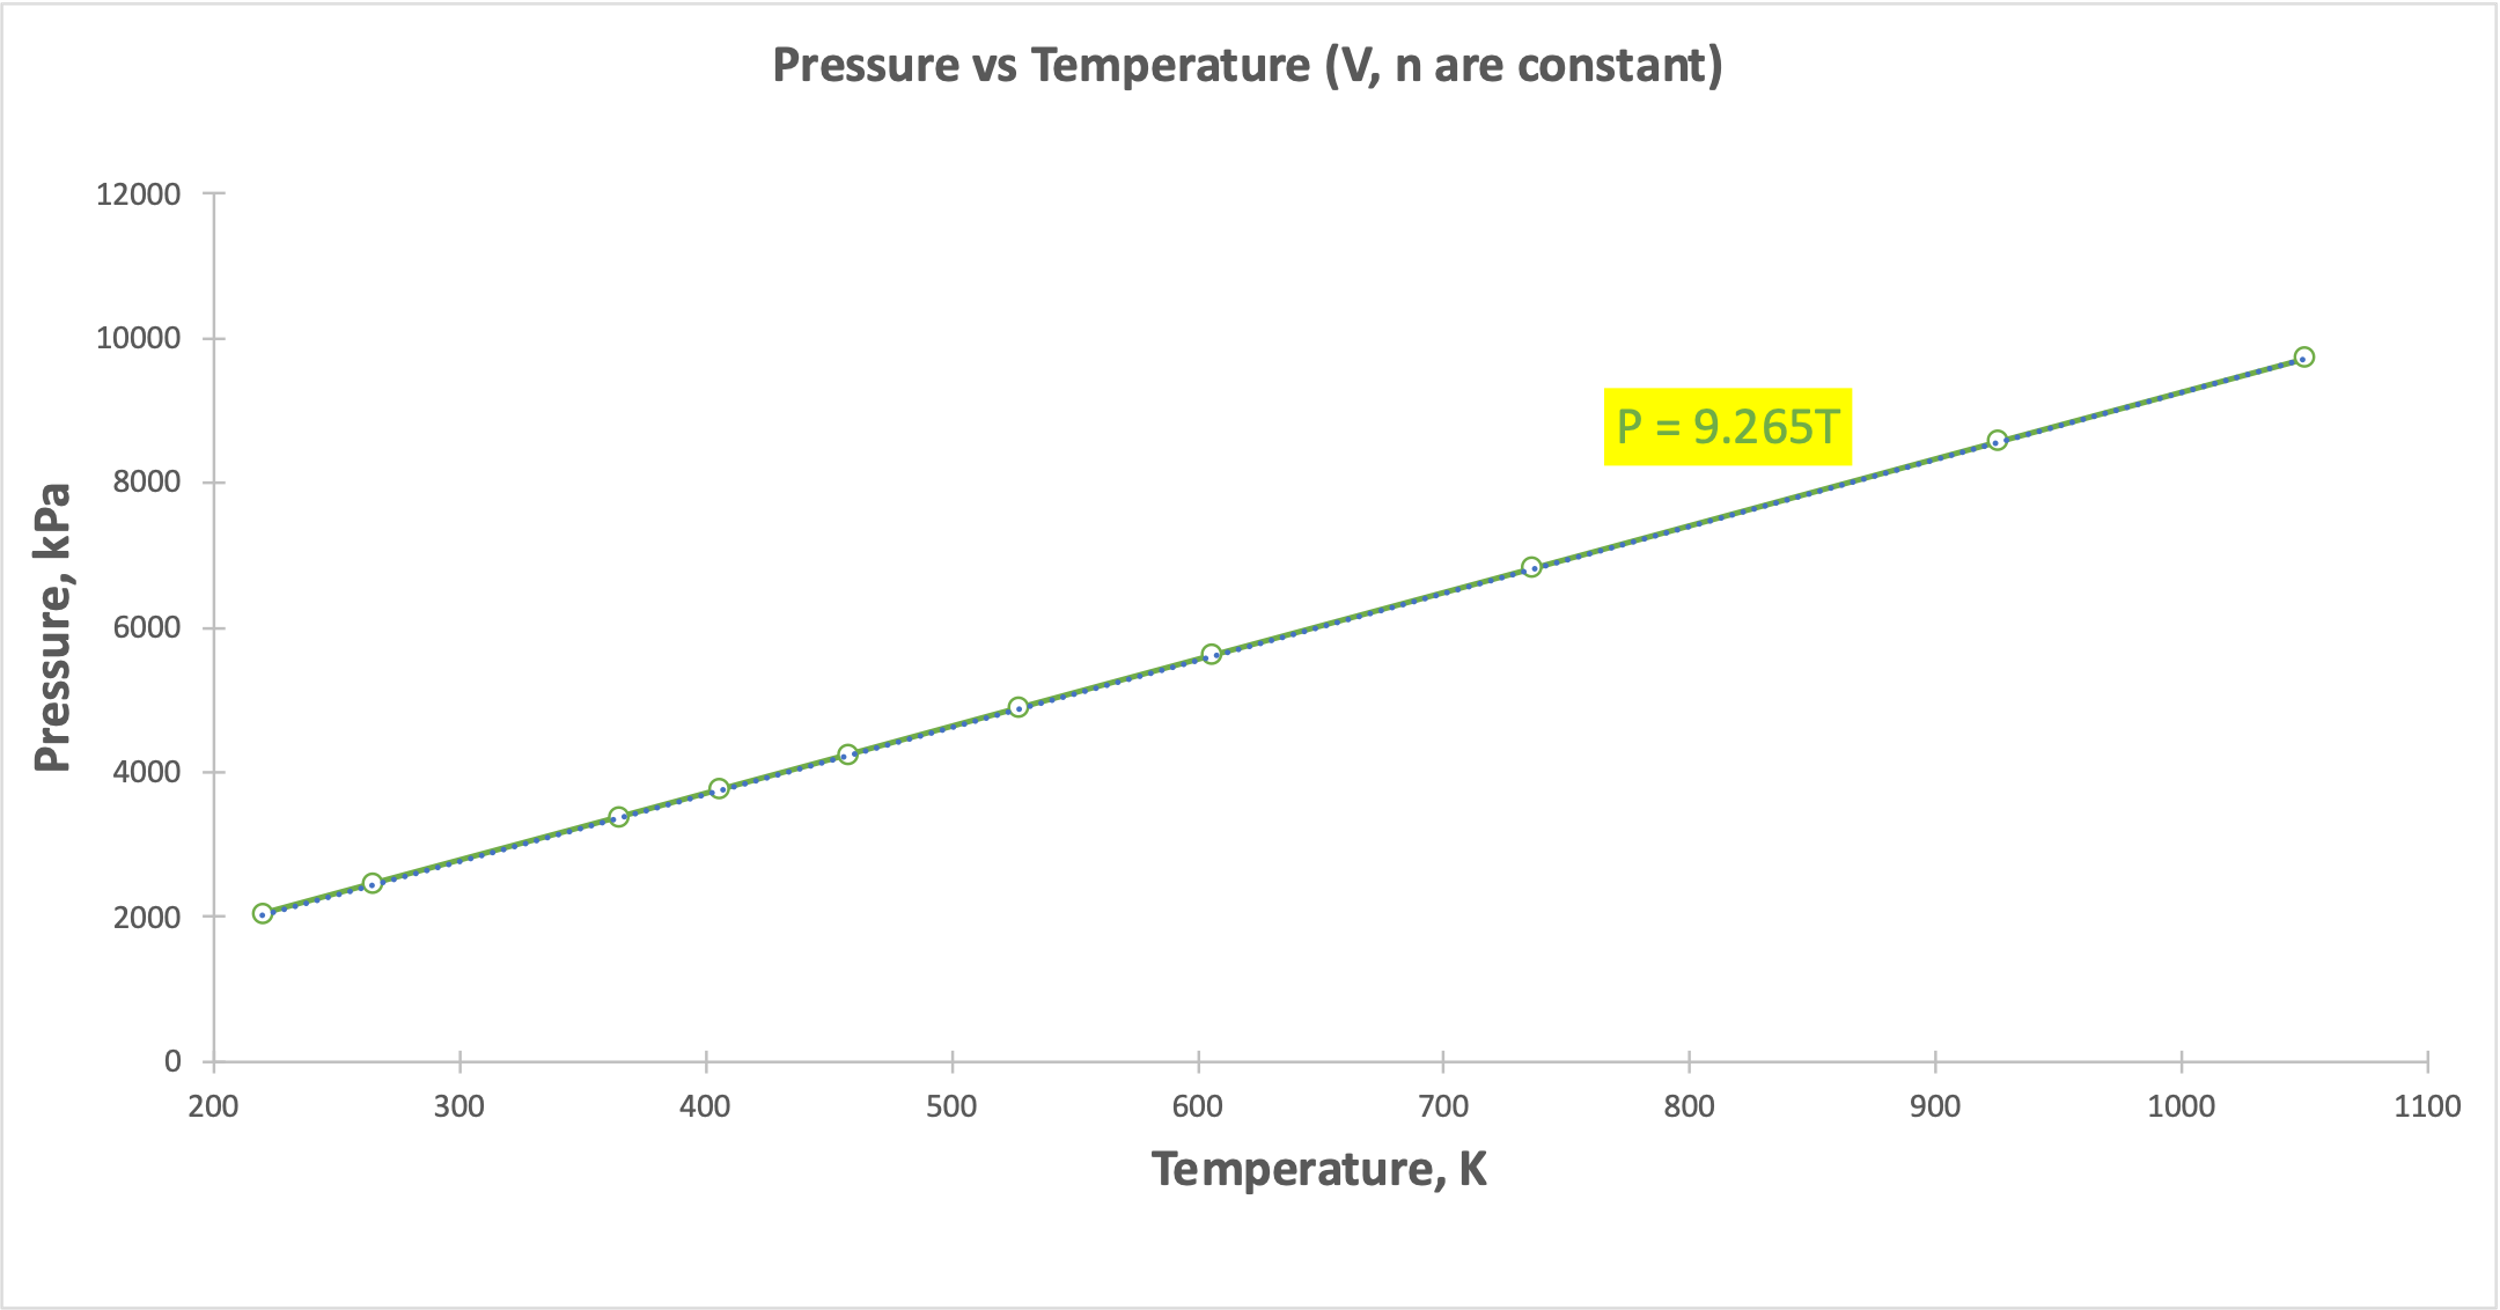 Pressure-temperature dependence at constant volume and mole number 